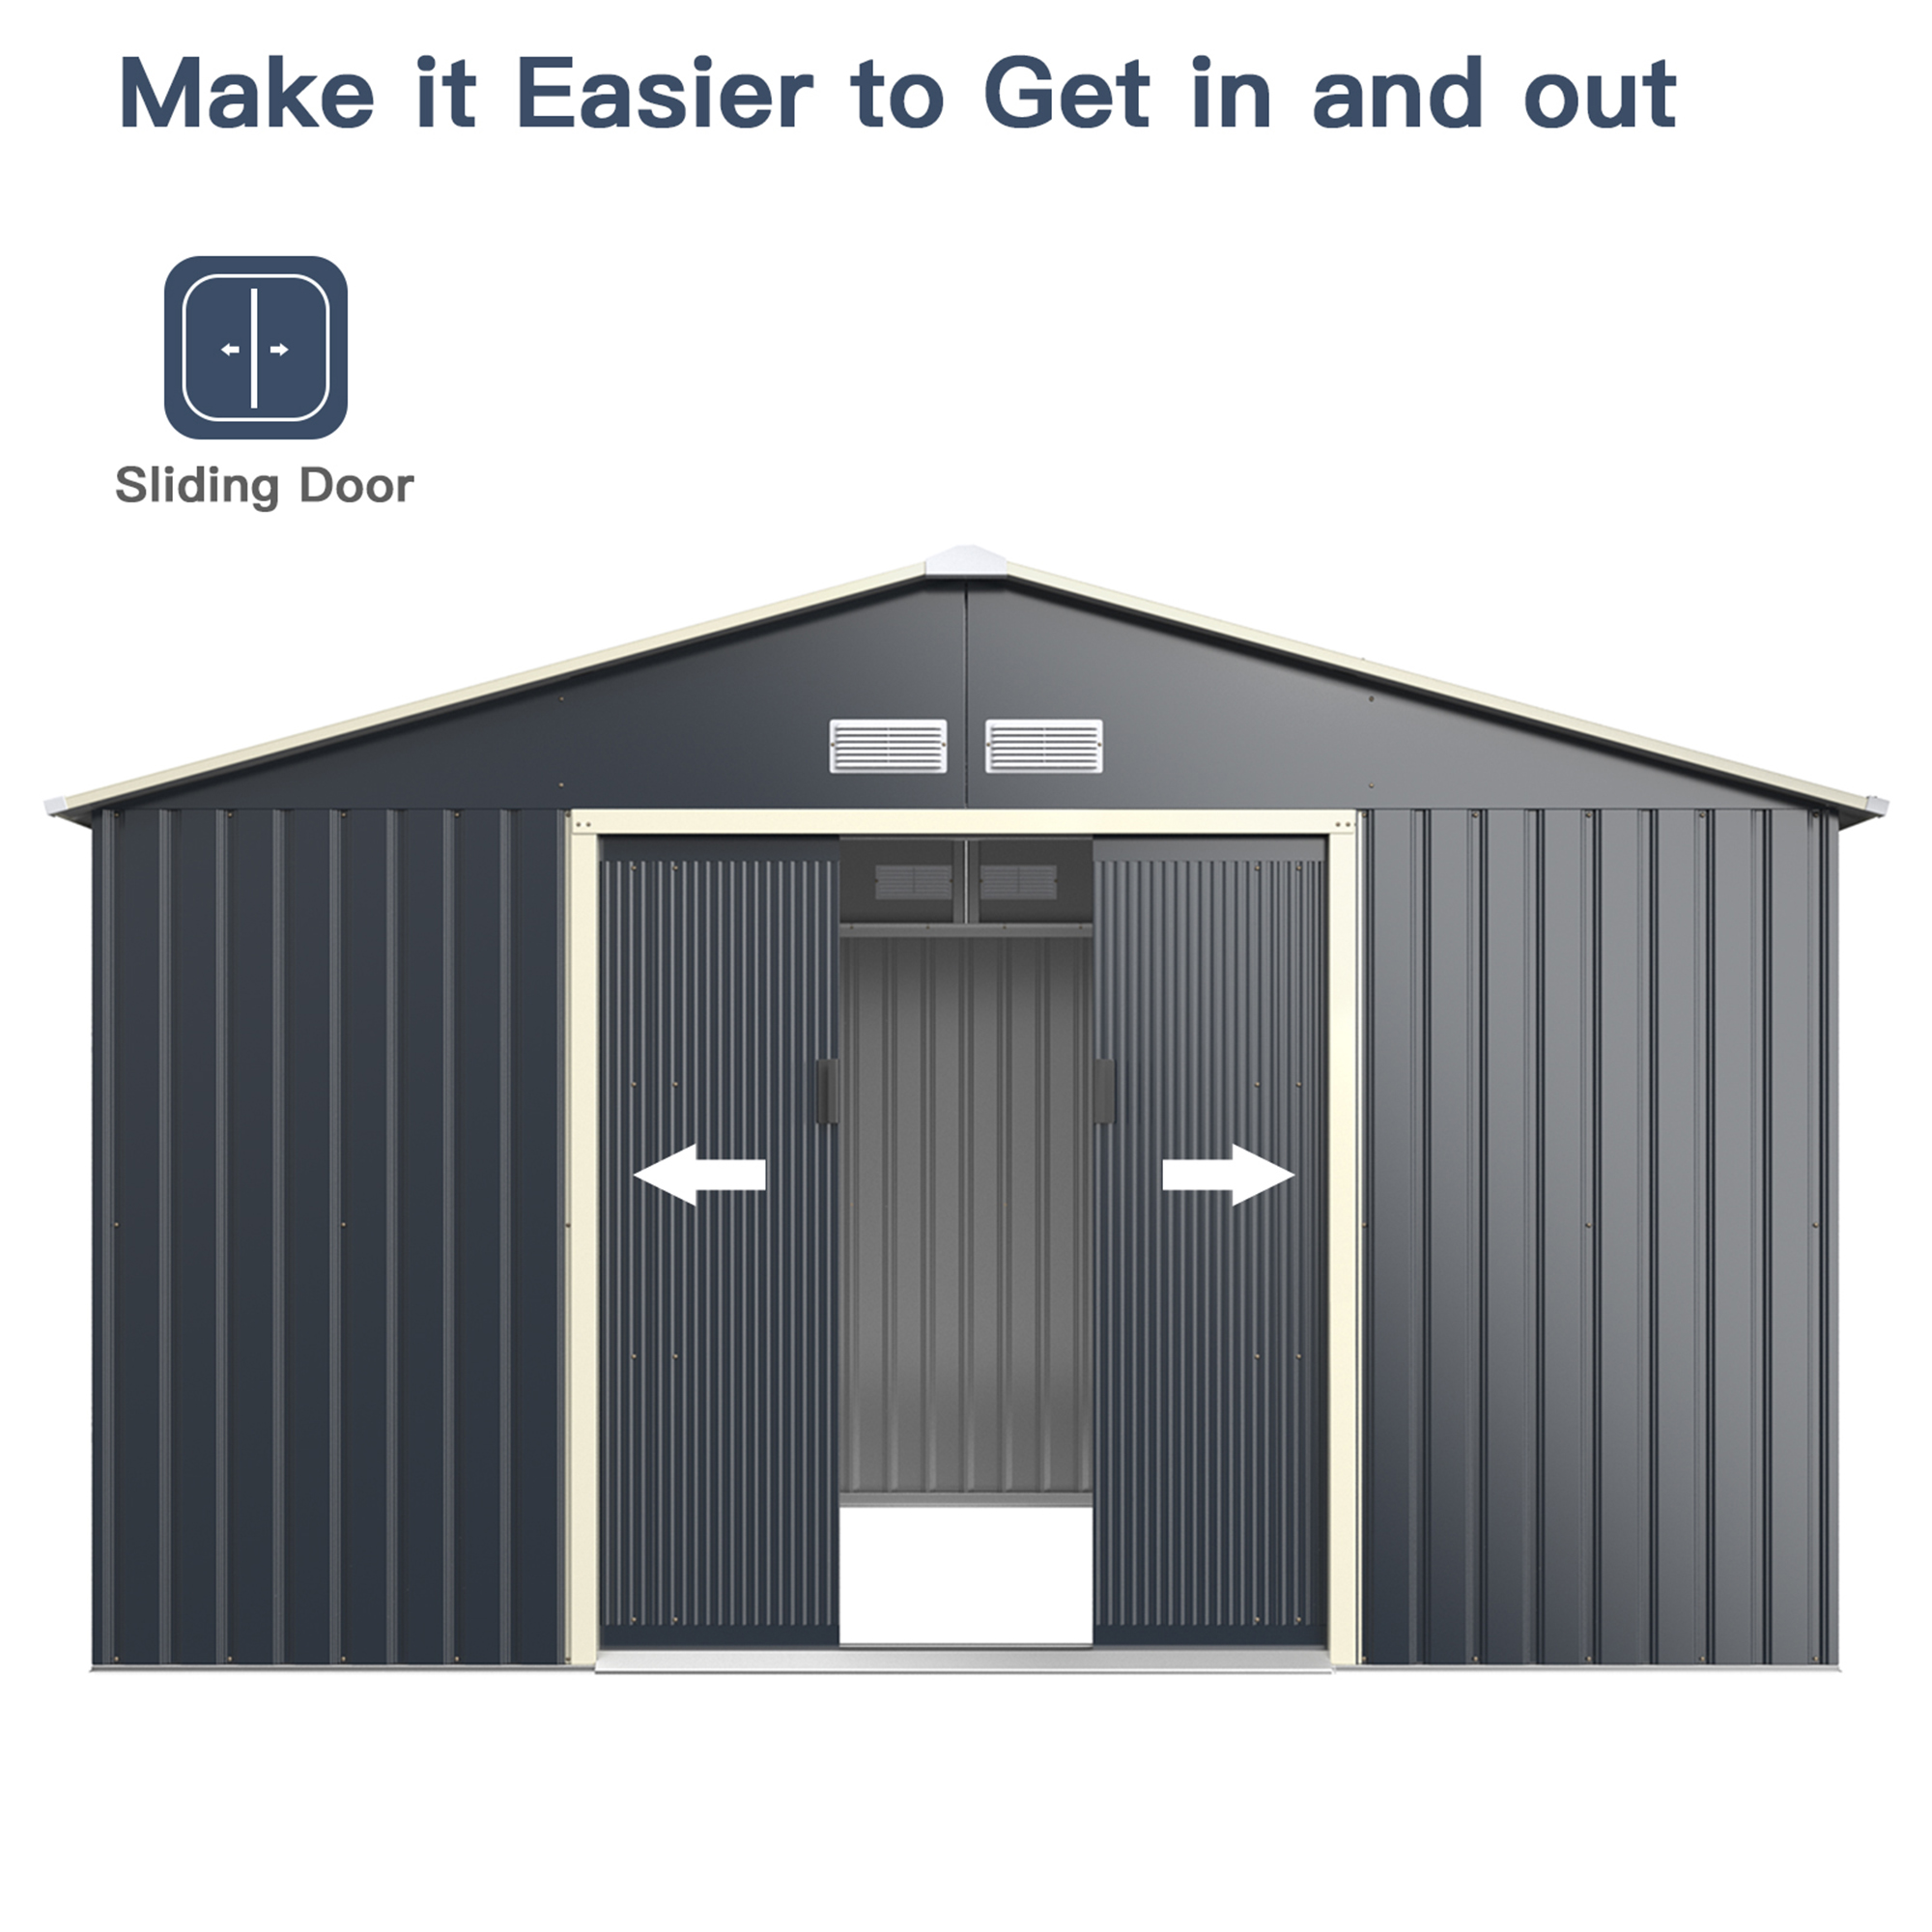 Gymax 11' x 10' Outdoor Tool Storage Shed Large Utility Storage House w/ Sliding Door - image 5 of 10